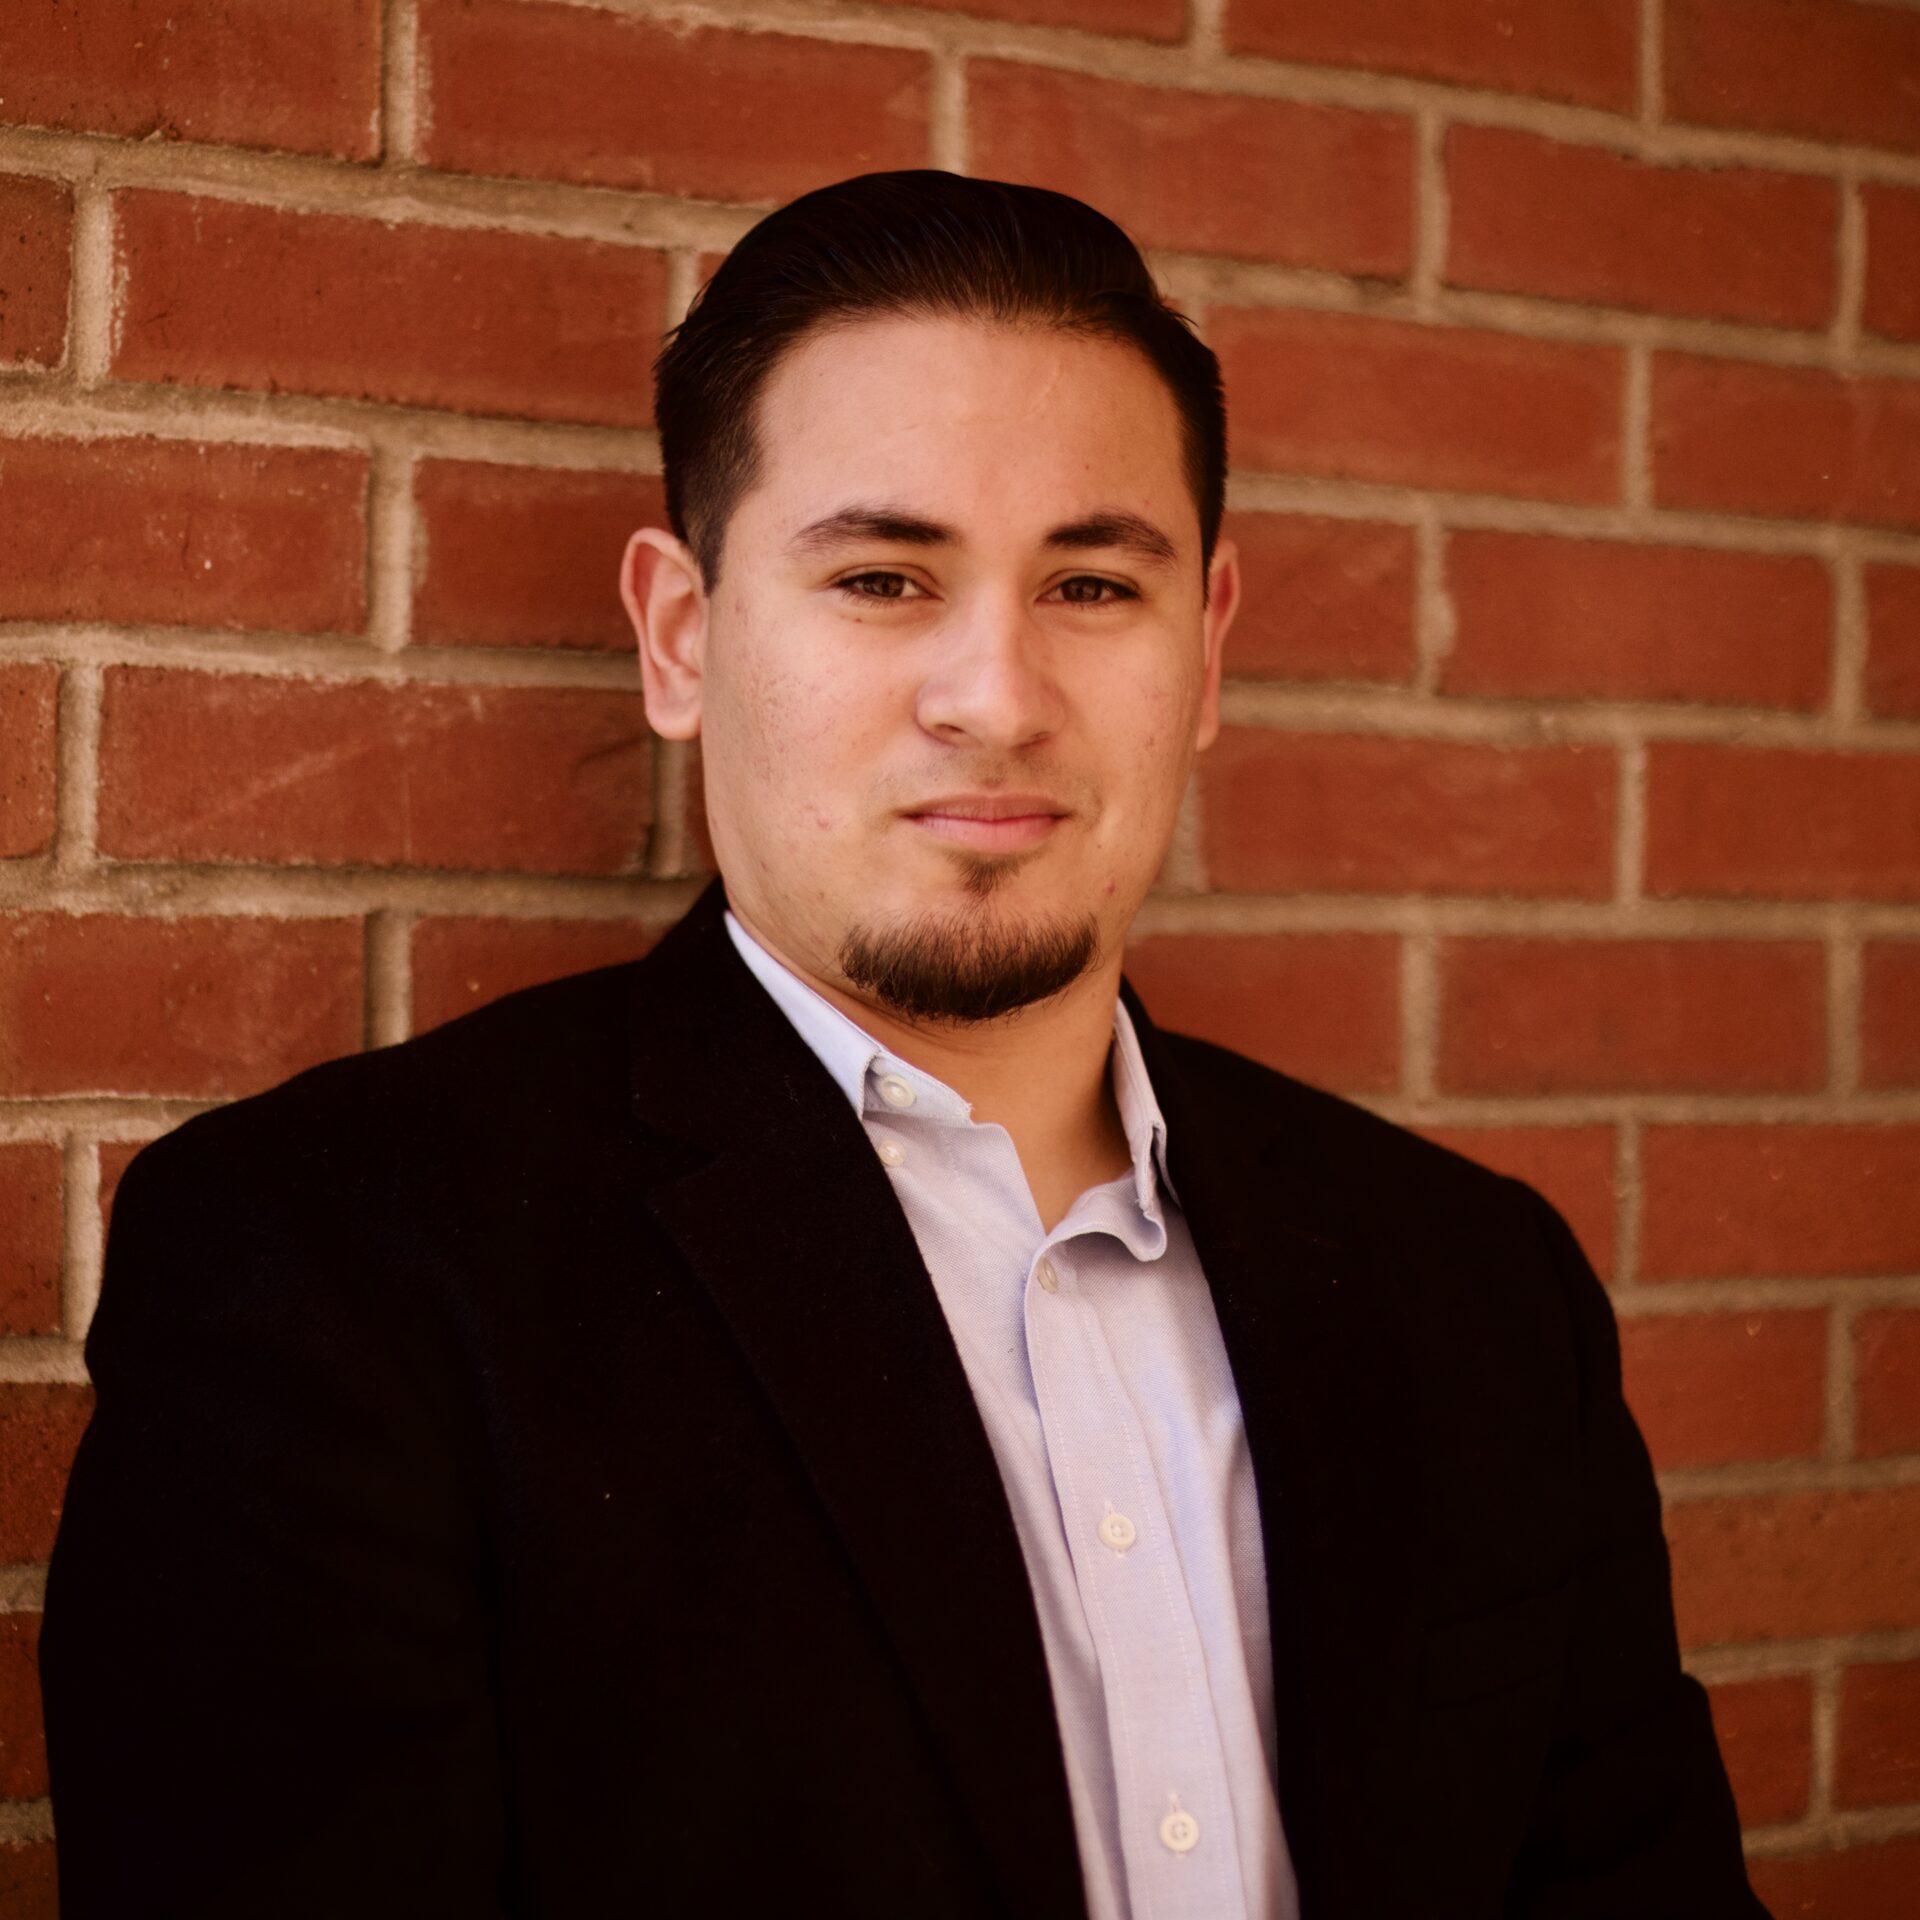 Ben, a Latino man with a combover, is standing in front of a brick wall.